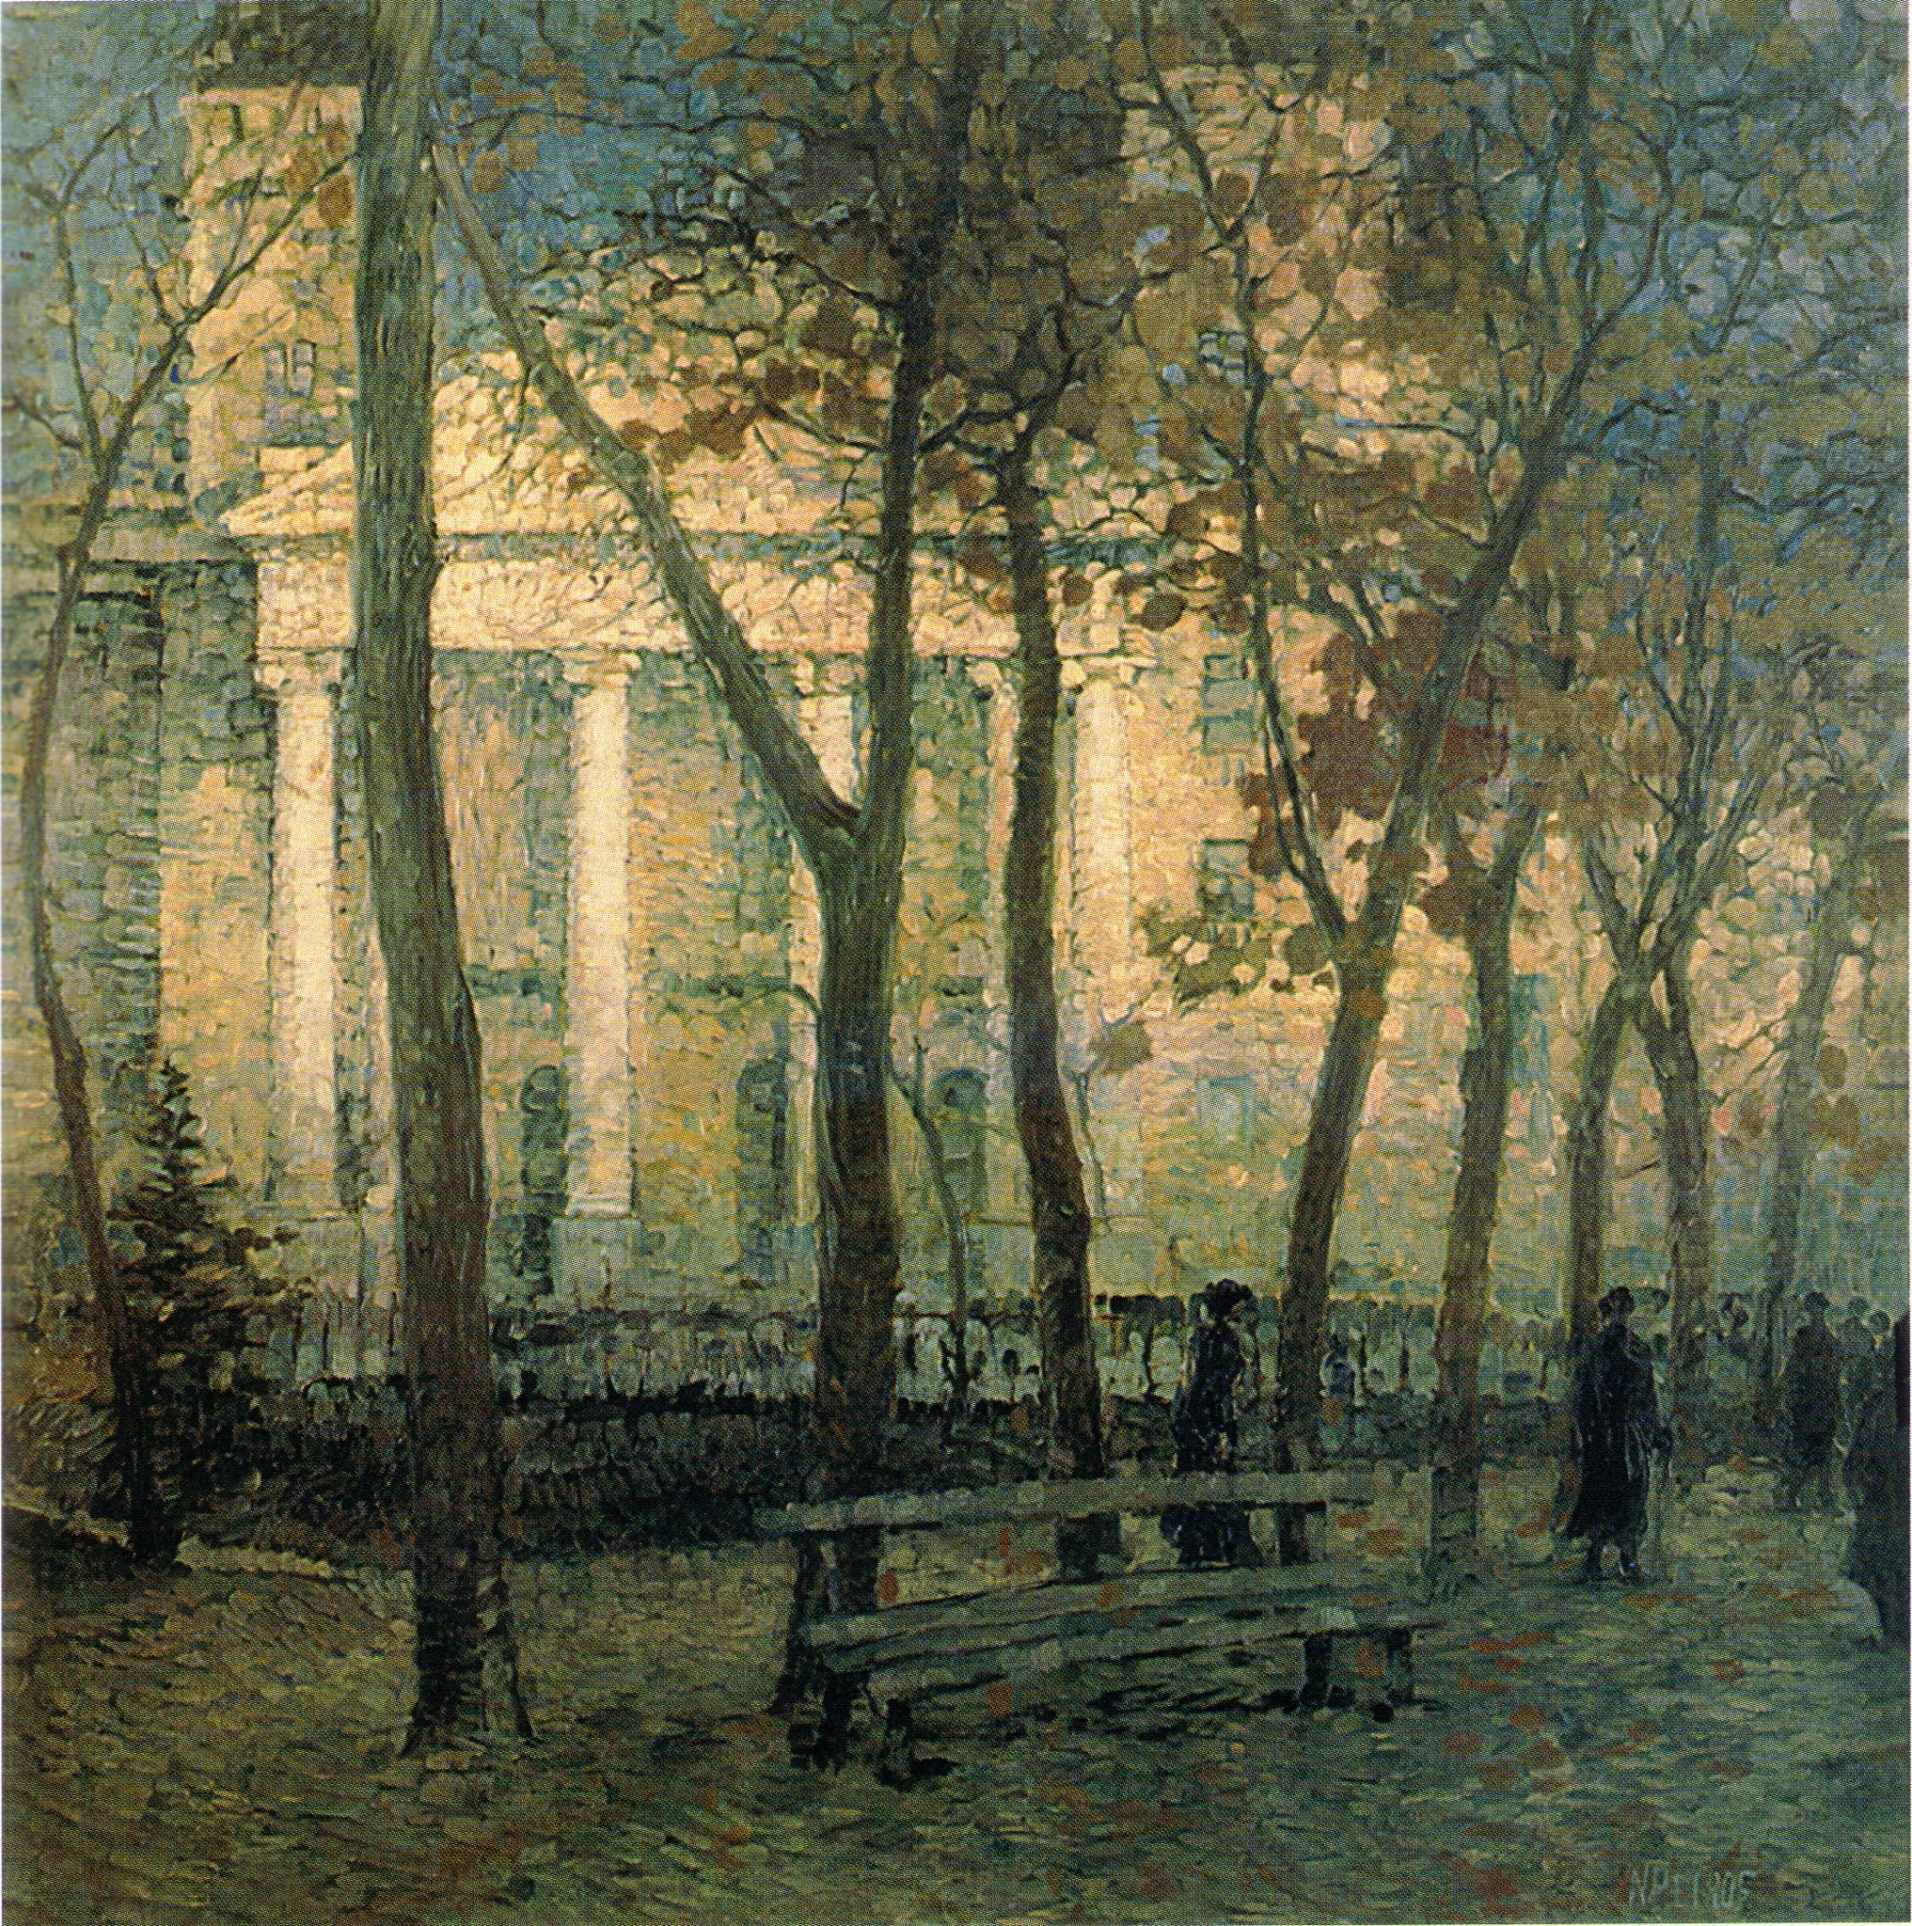 the painting depicts a large building in the background